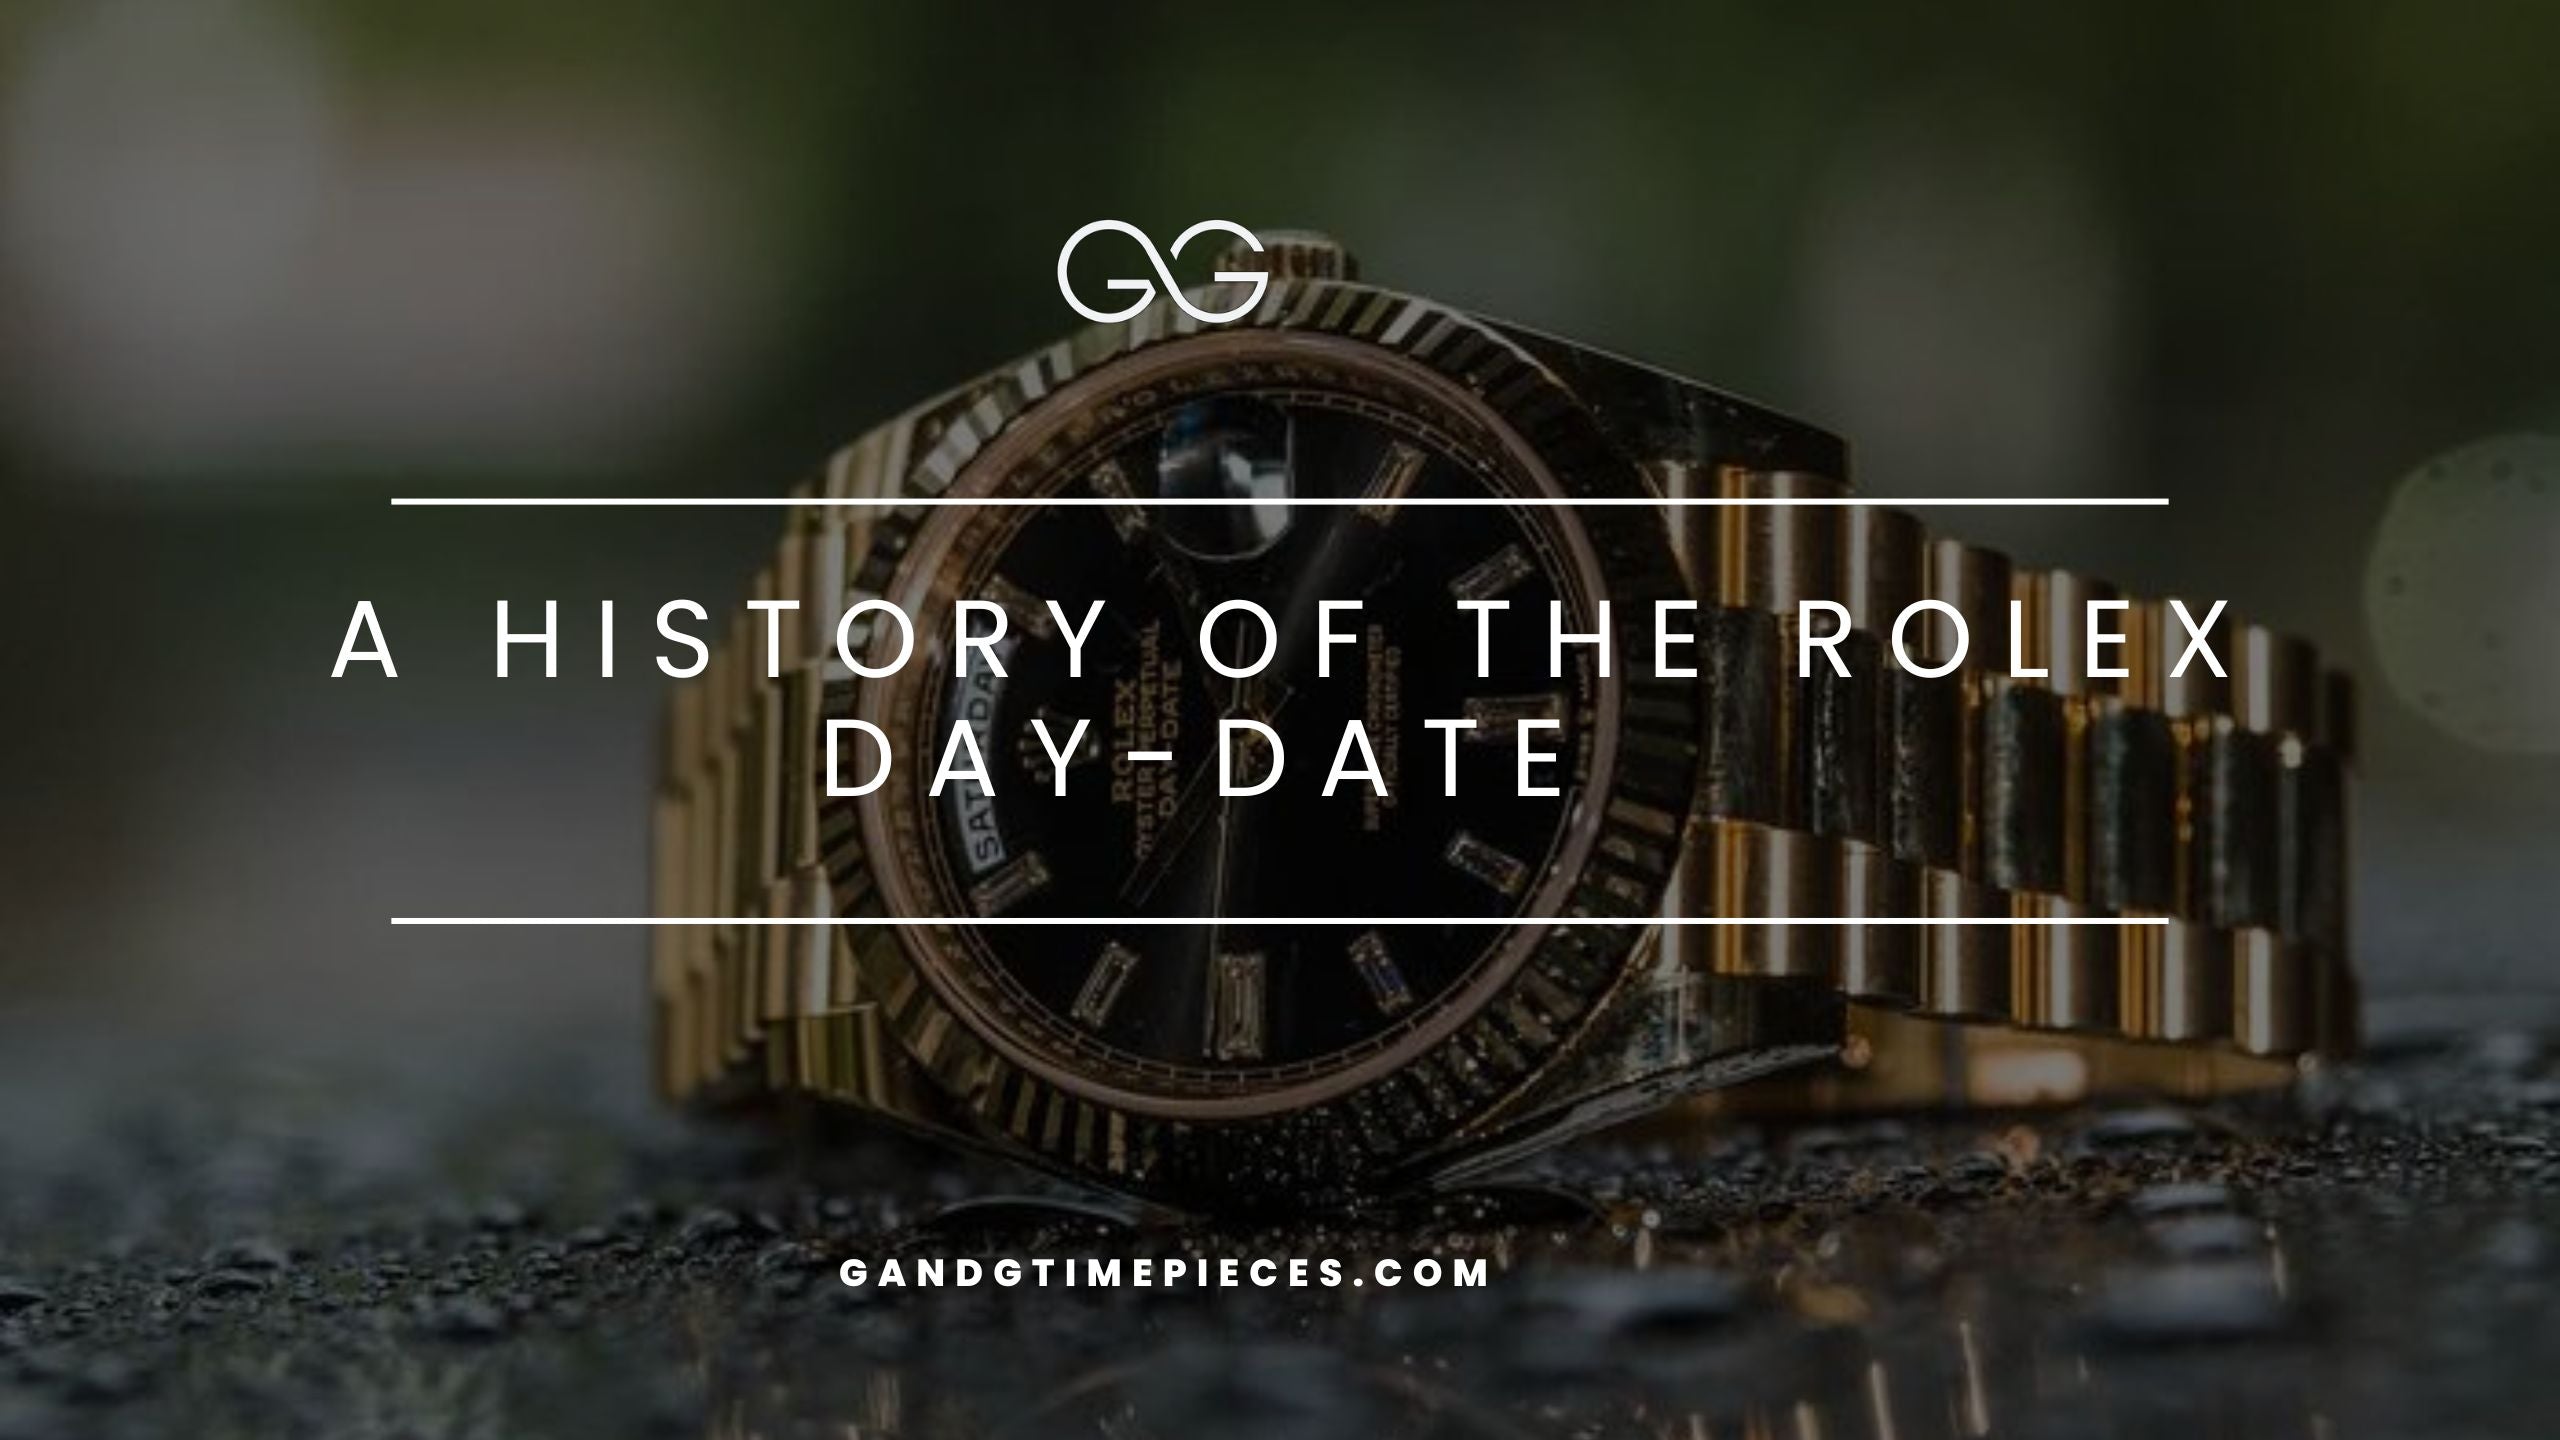 A History of the Rolex Day-Date